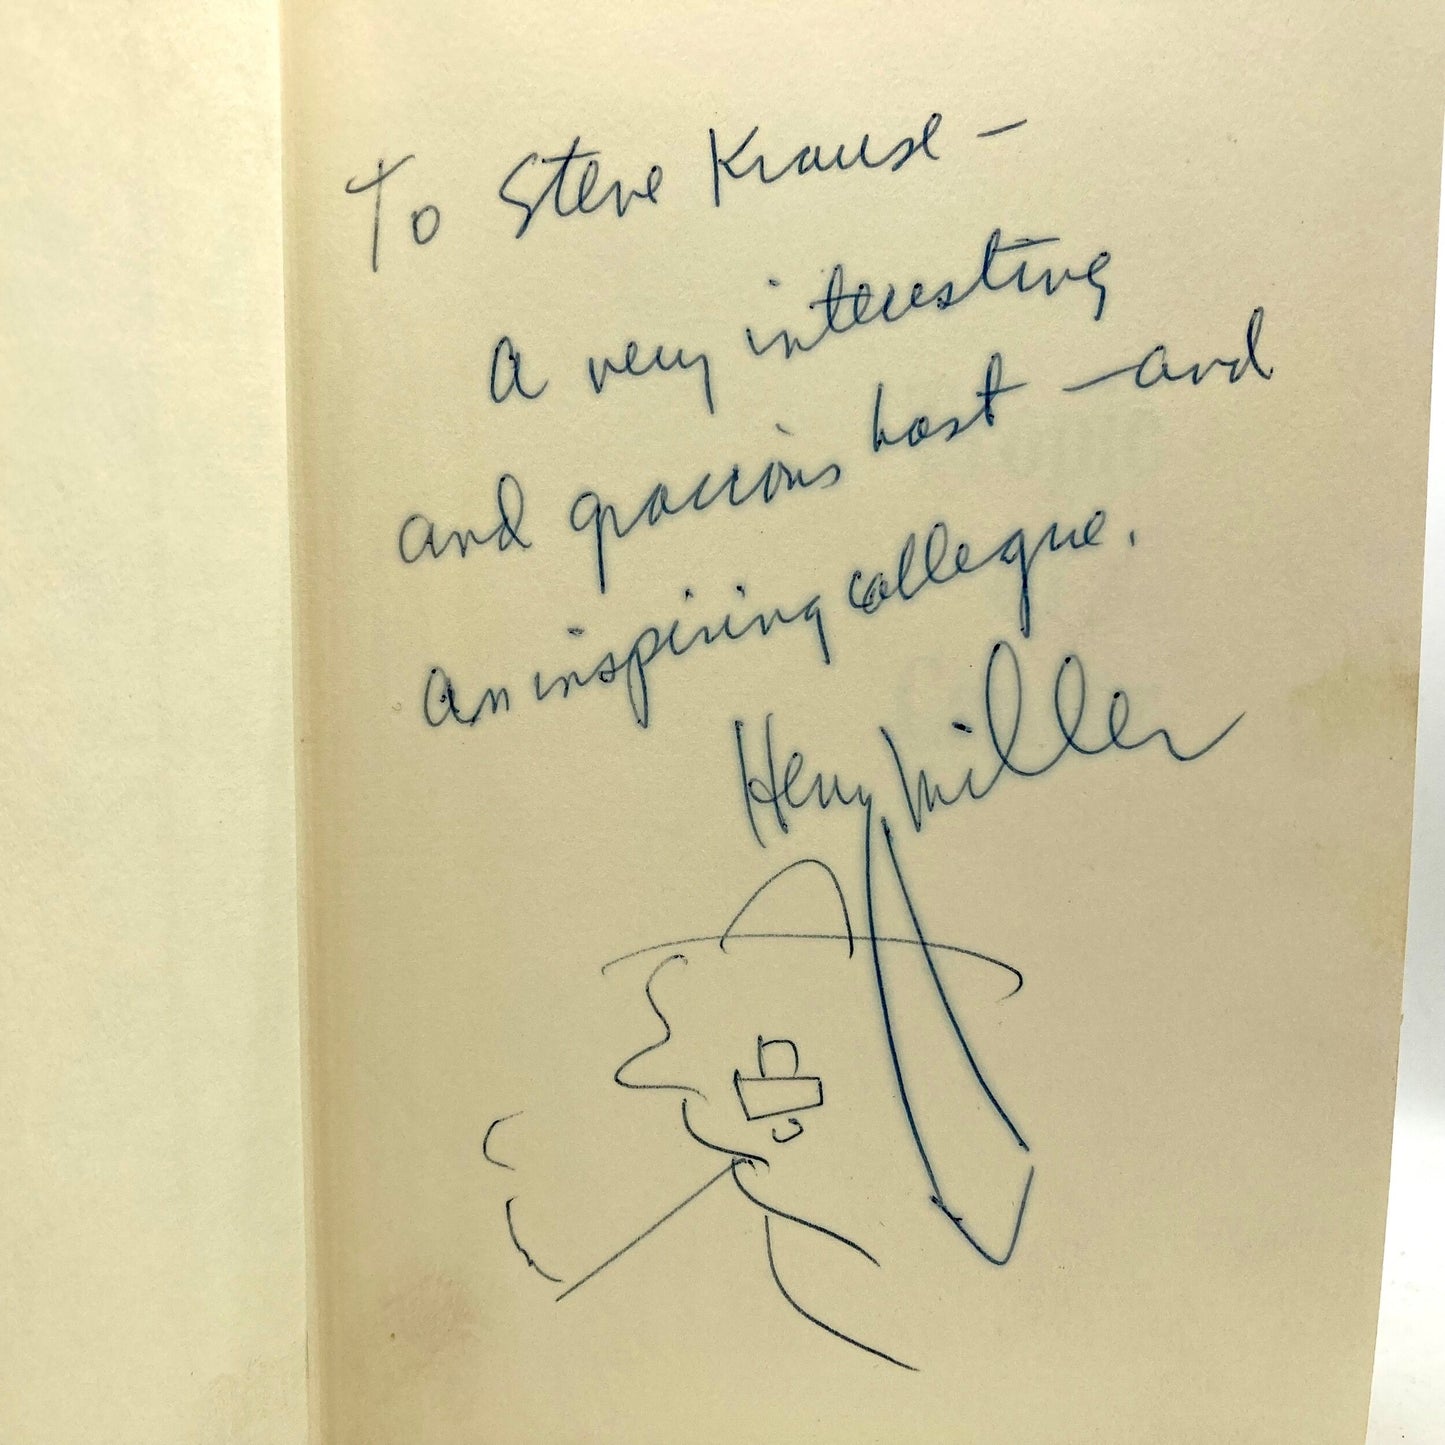 MILLER, Henry "Tropic of Cancer"/"Tropic of Capricorn" [Grove Press, 1961] (Signed) - Buzz Bookstore